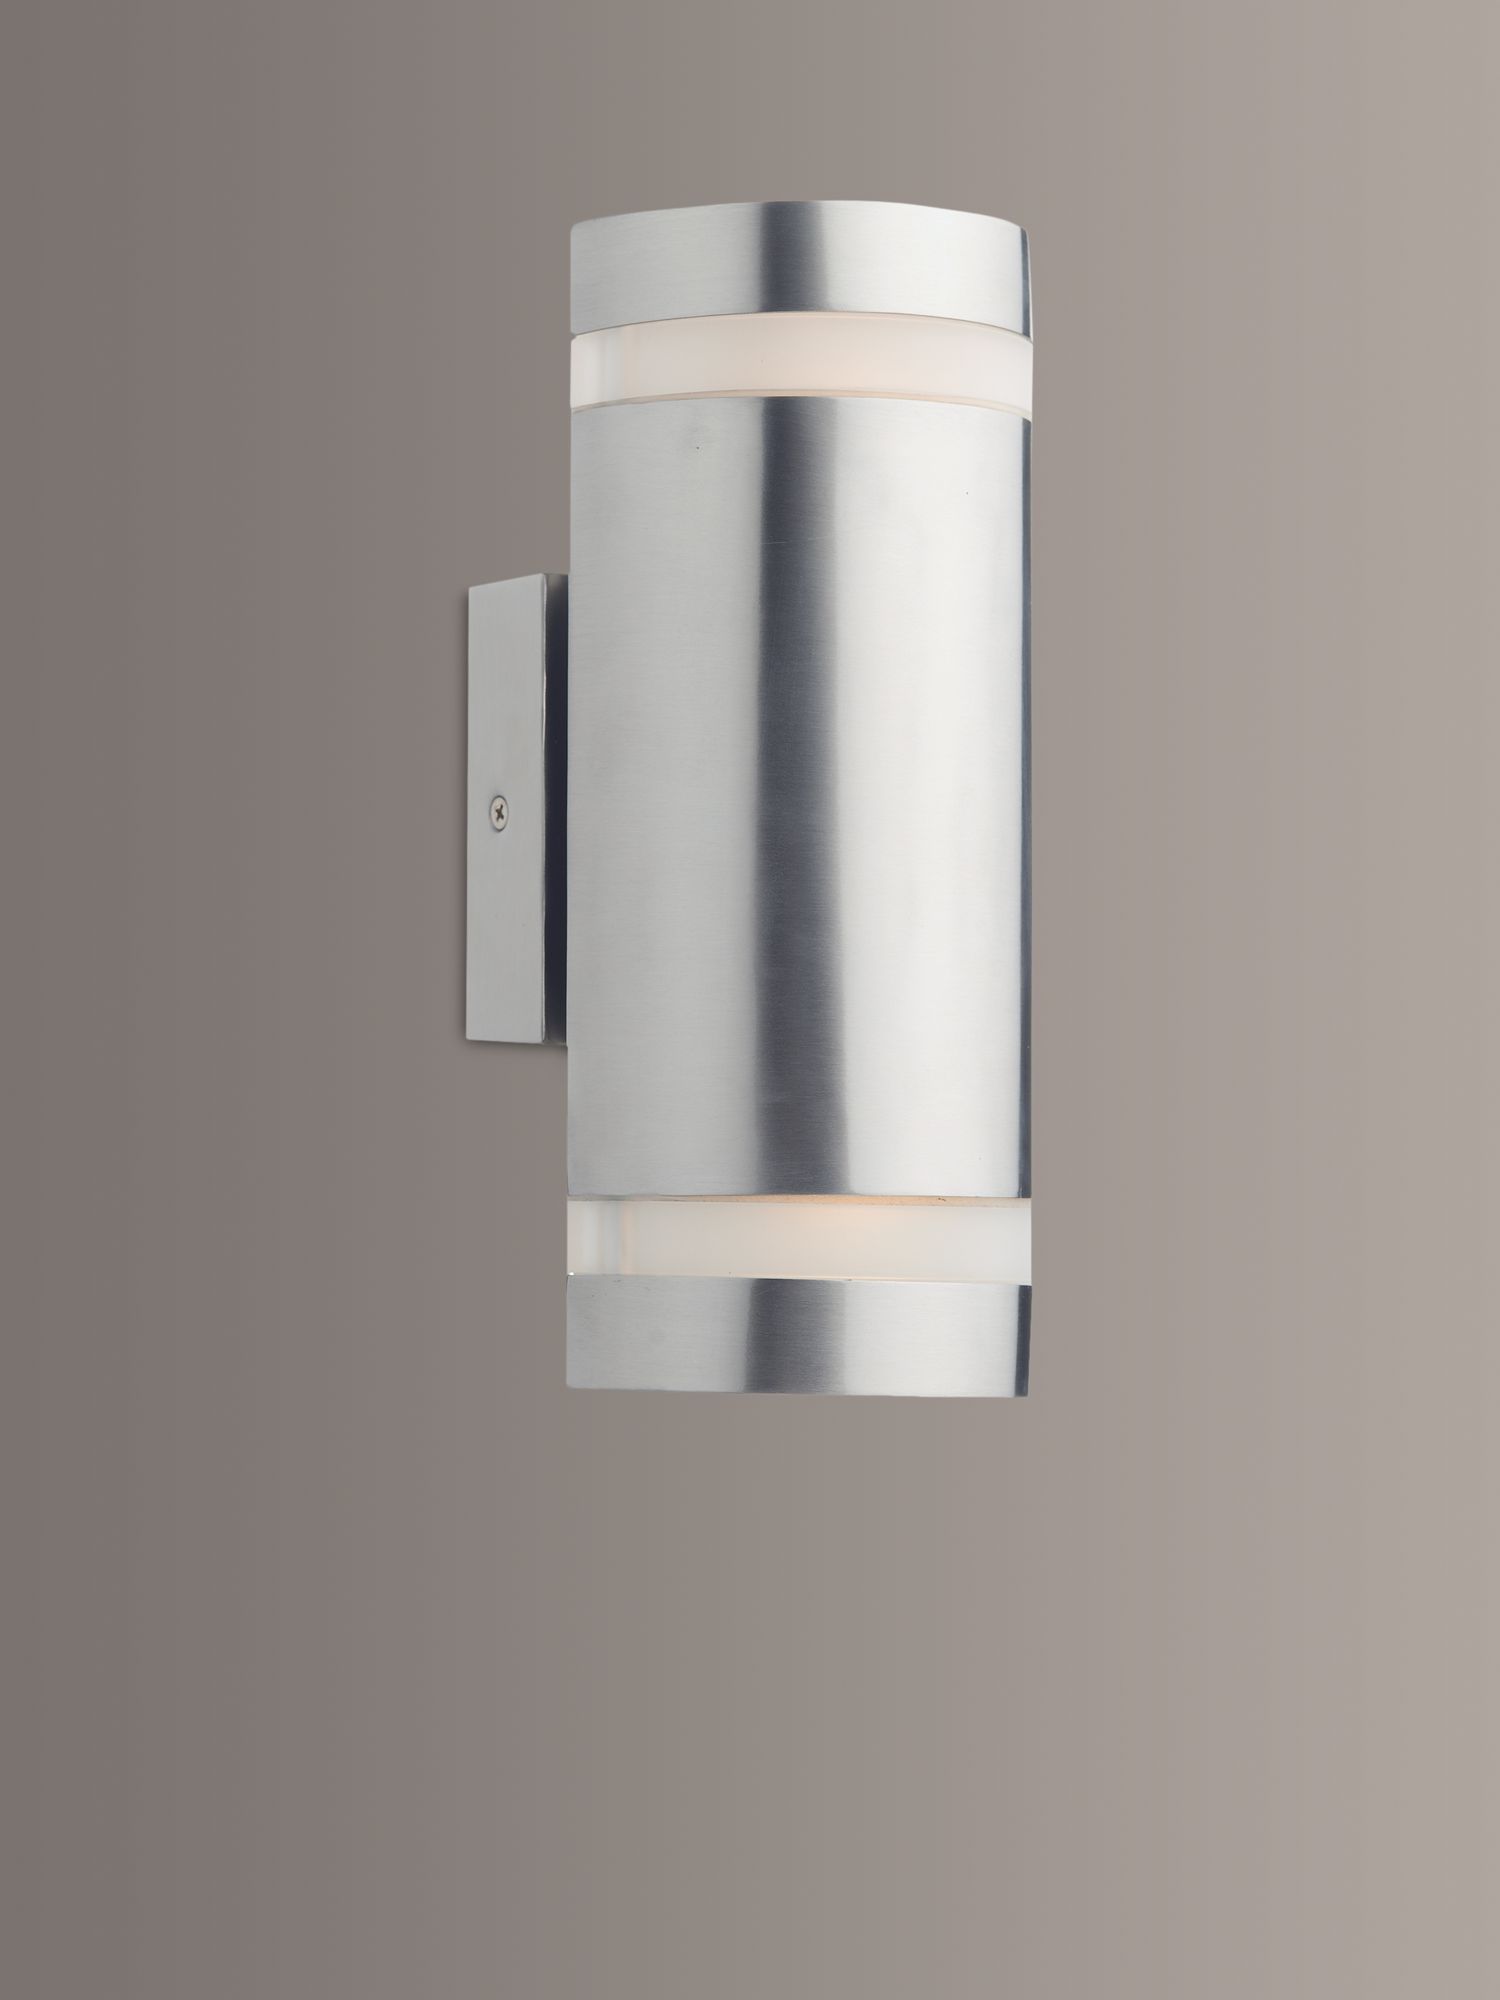 Photo of Där wessex led outdoor wall light stainless steel